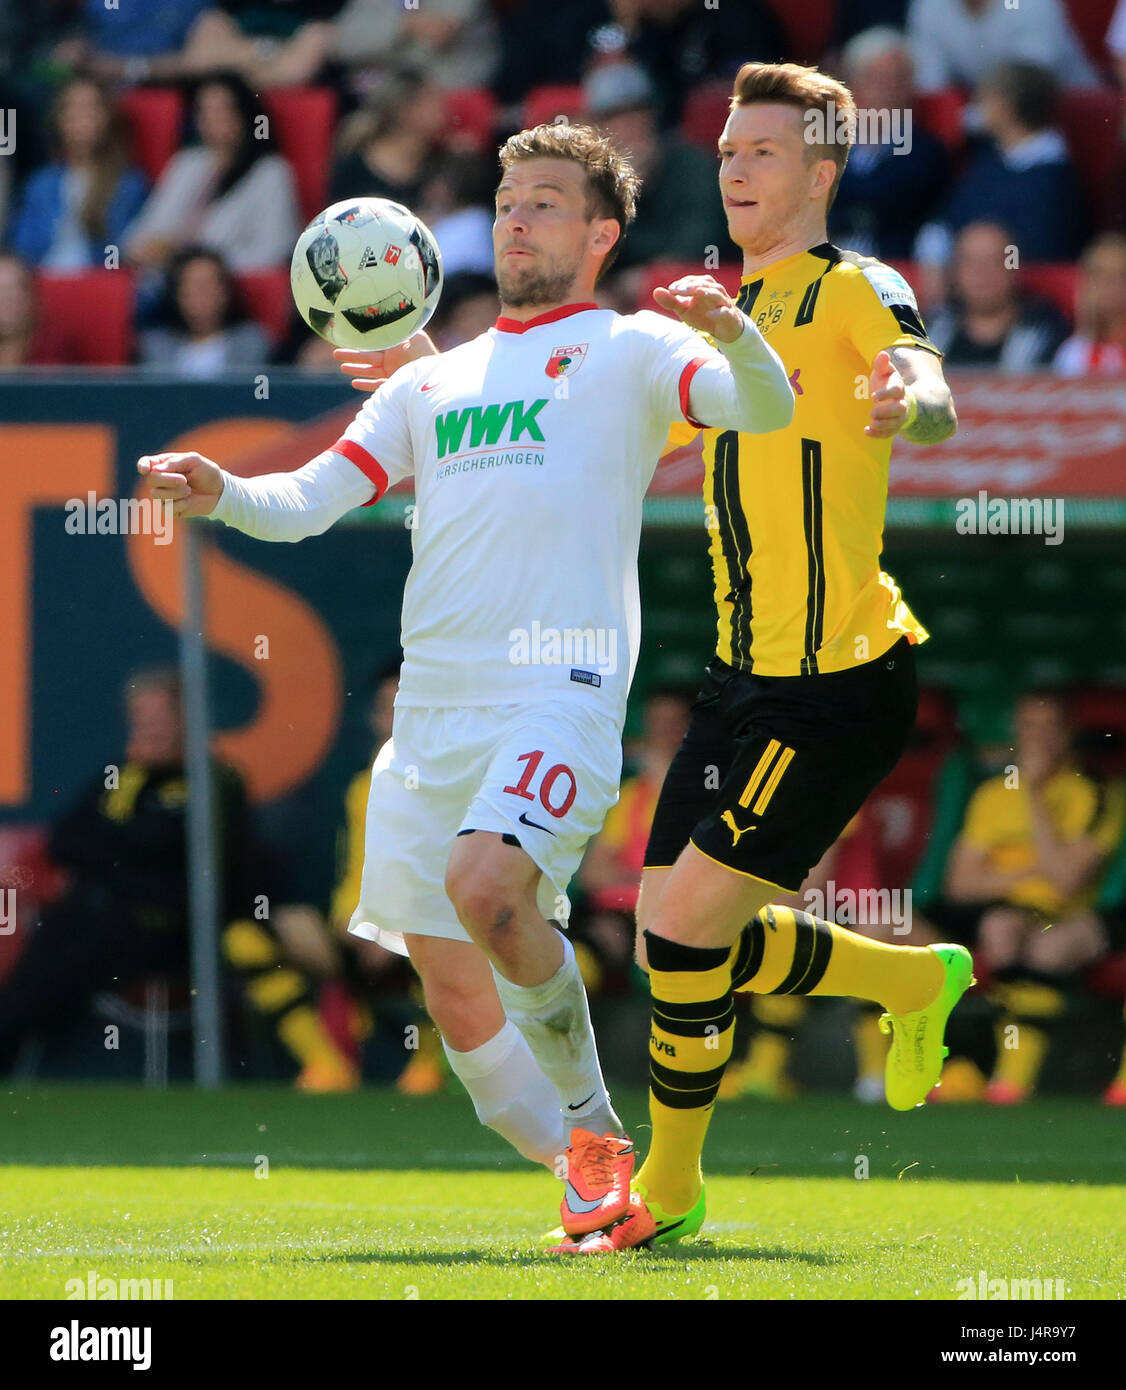 Augsburg, Germany. 13th May, 2017. FC Augsburg's Daniel Baier (L) vies with Borussia Dortmund's Marco Reus during a German Bundesliga match between FC Augsburg and Borussia Dortmund in Augsburg, Germany, May 13, 2017. The match ended 1-1. Credit: Philippe Ruiz/Xinhua/Alamy Live News Stock Photo